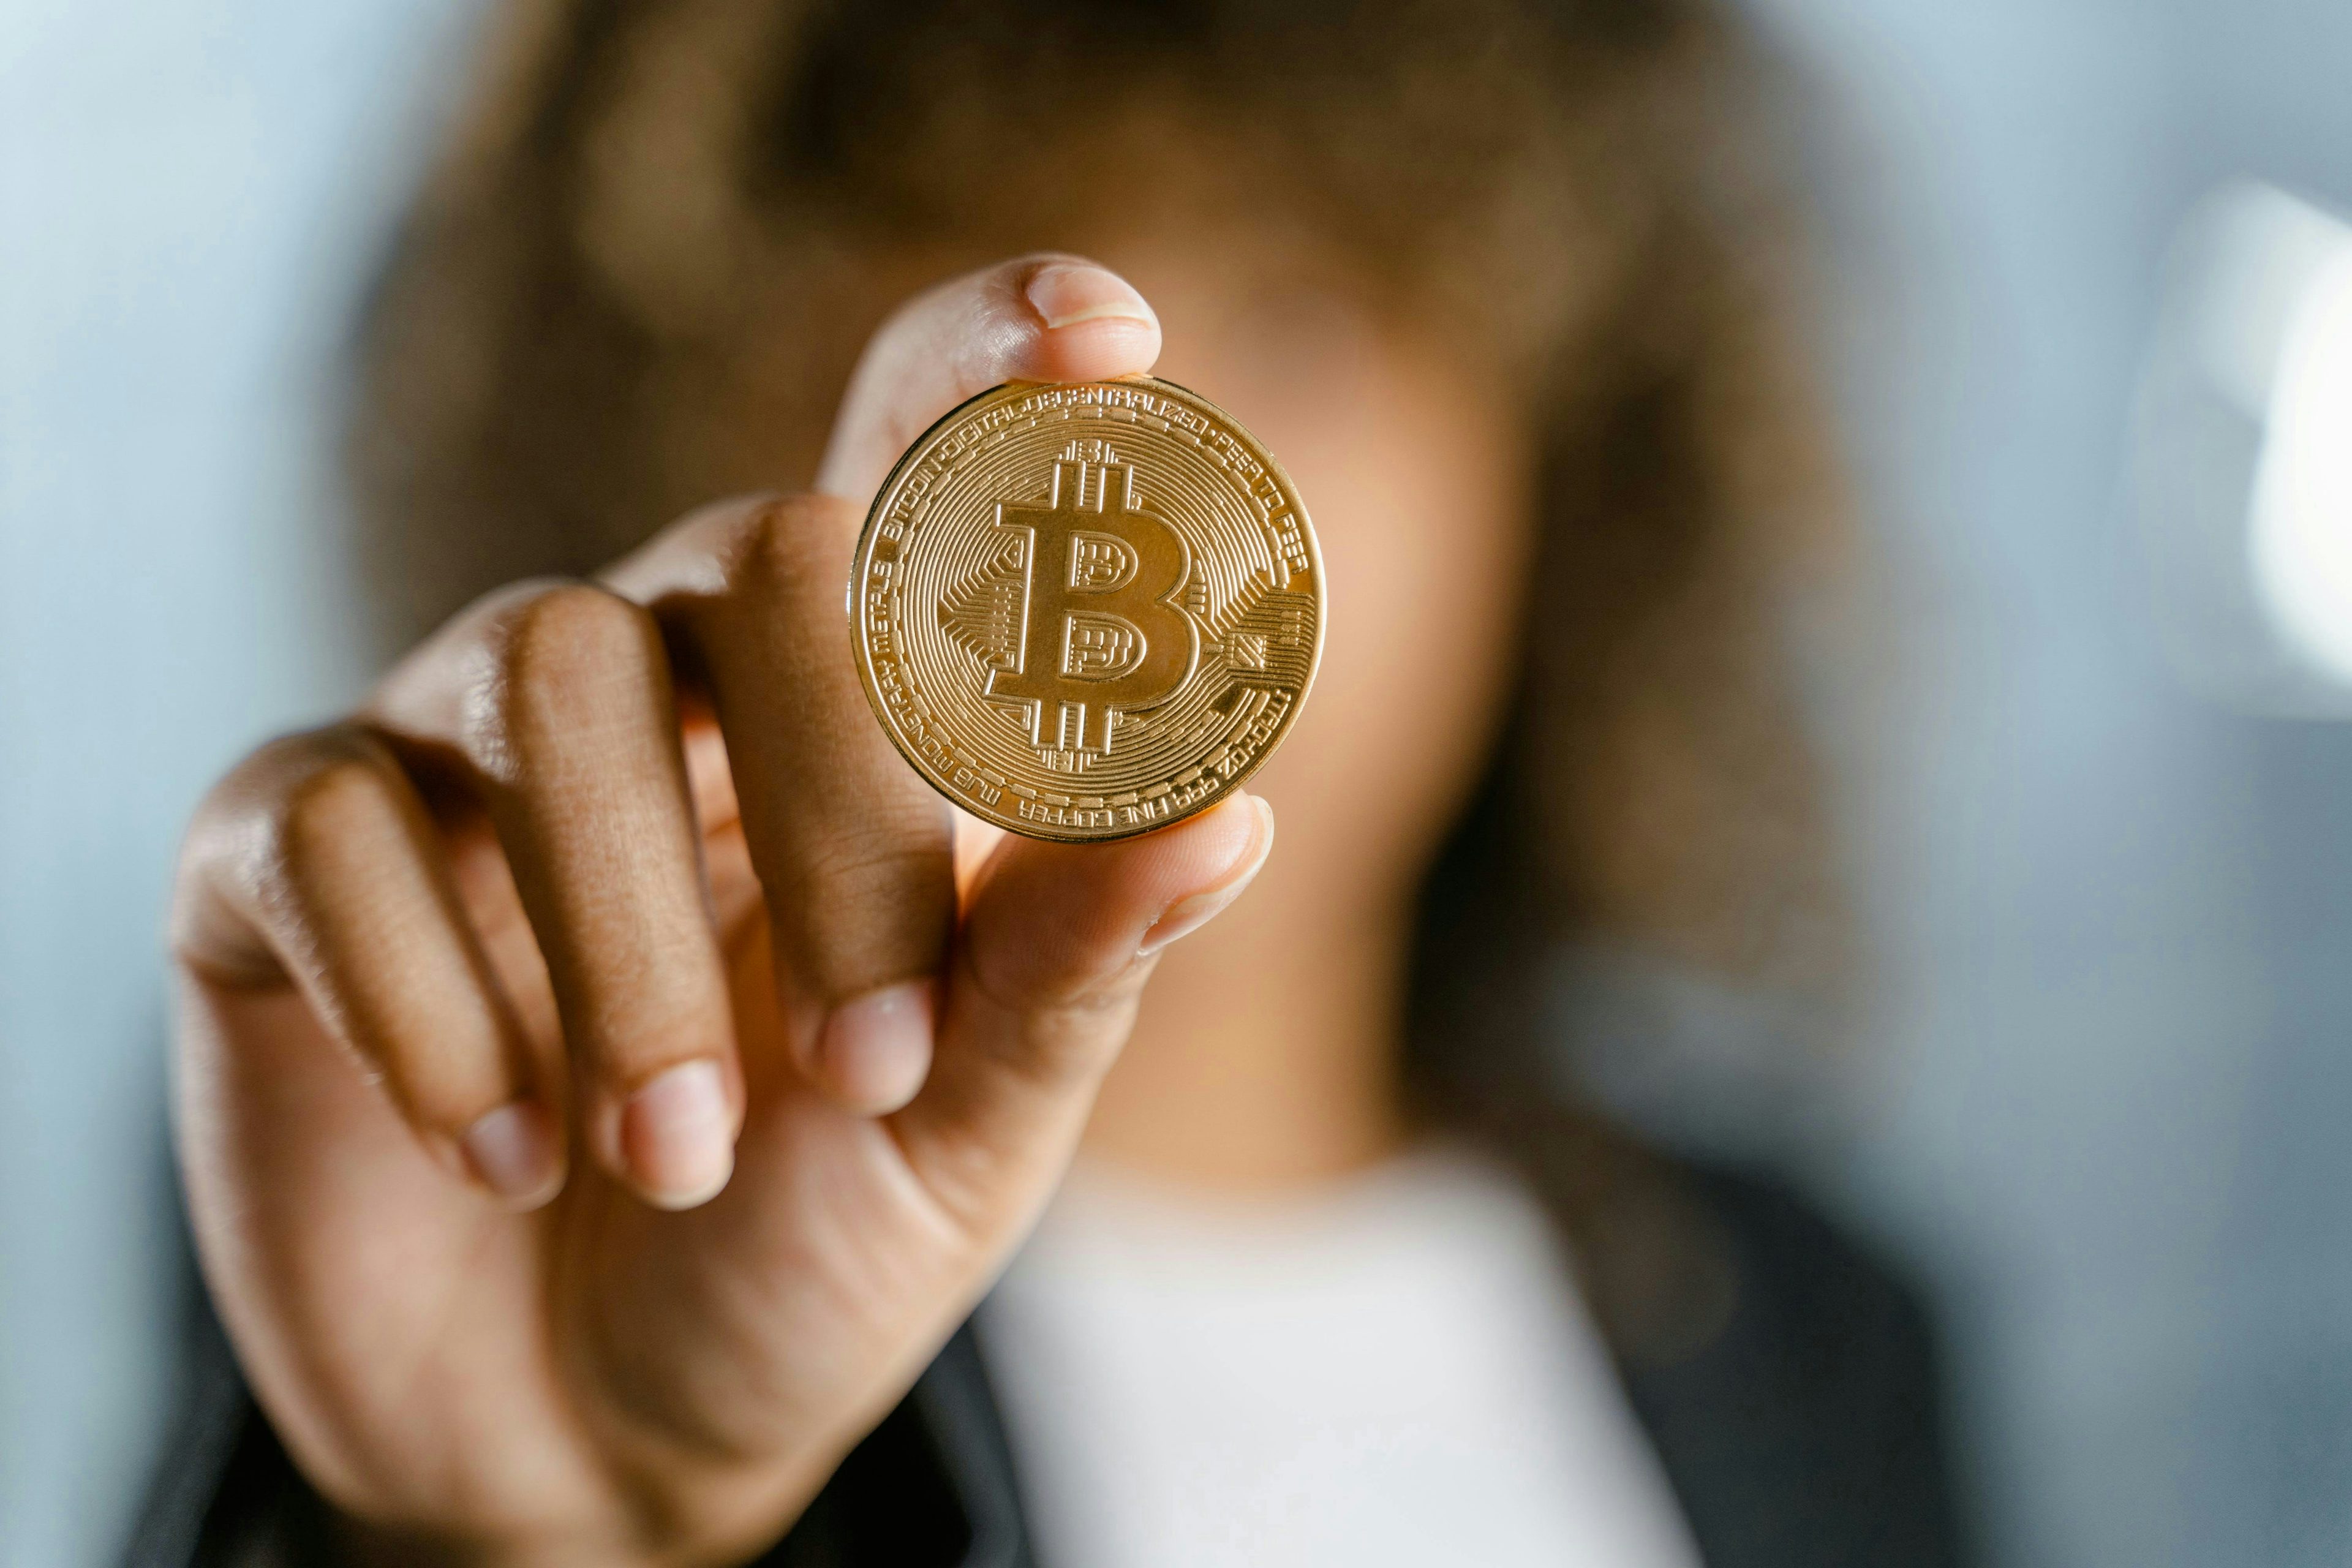 A close-up of a Bitcoin coin prominently displayed in the foreground, held by a woman whose hand is in focus, with a blurred image of her in the background, emphasizing the prominence of the cryptocurrency.